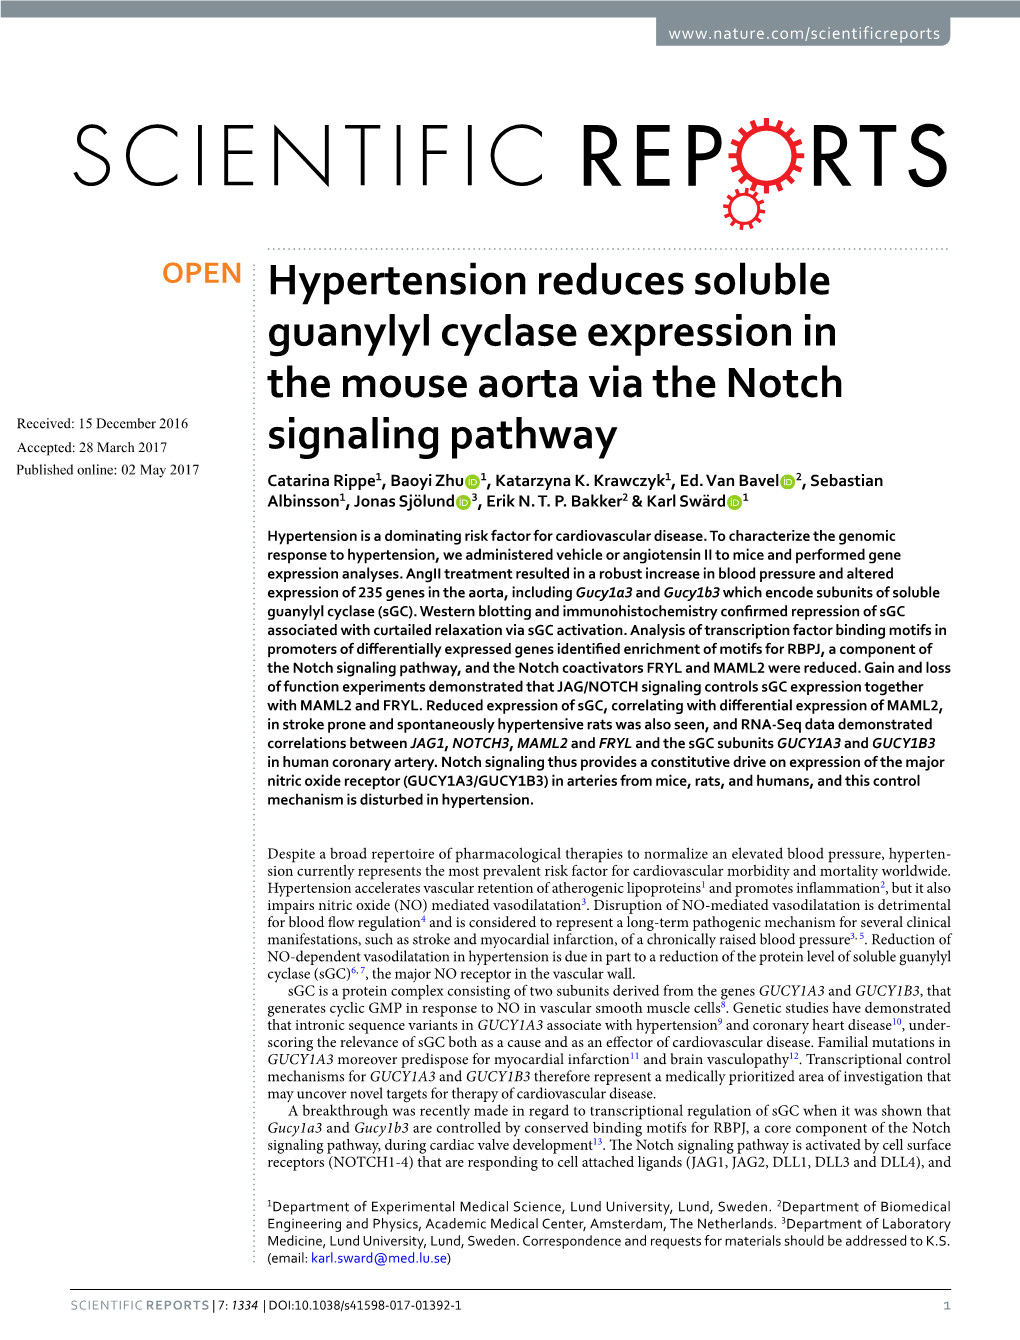 Hypertension Reduces Soluble Guanylyl Cyclase Expression in The